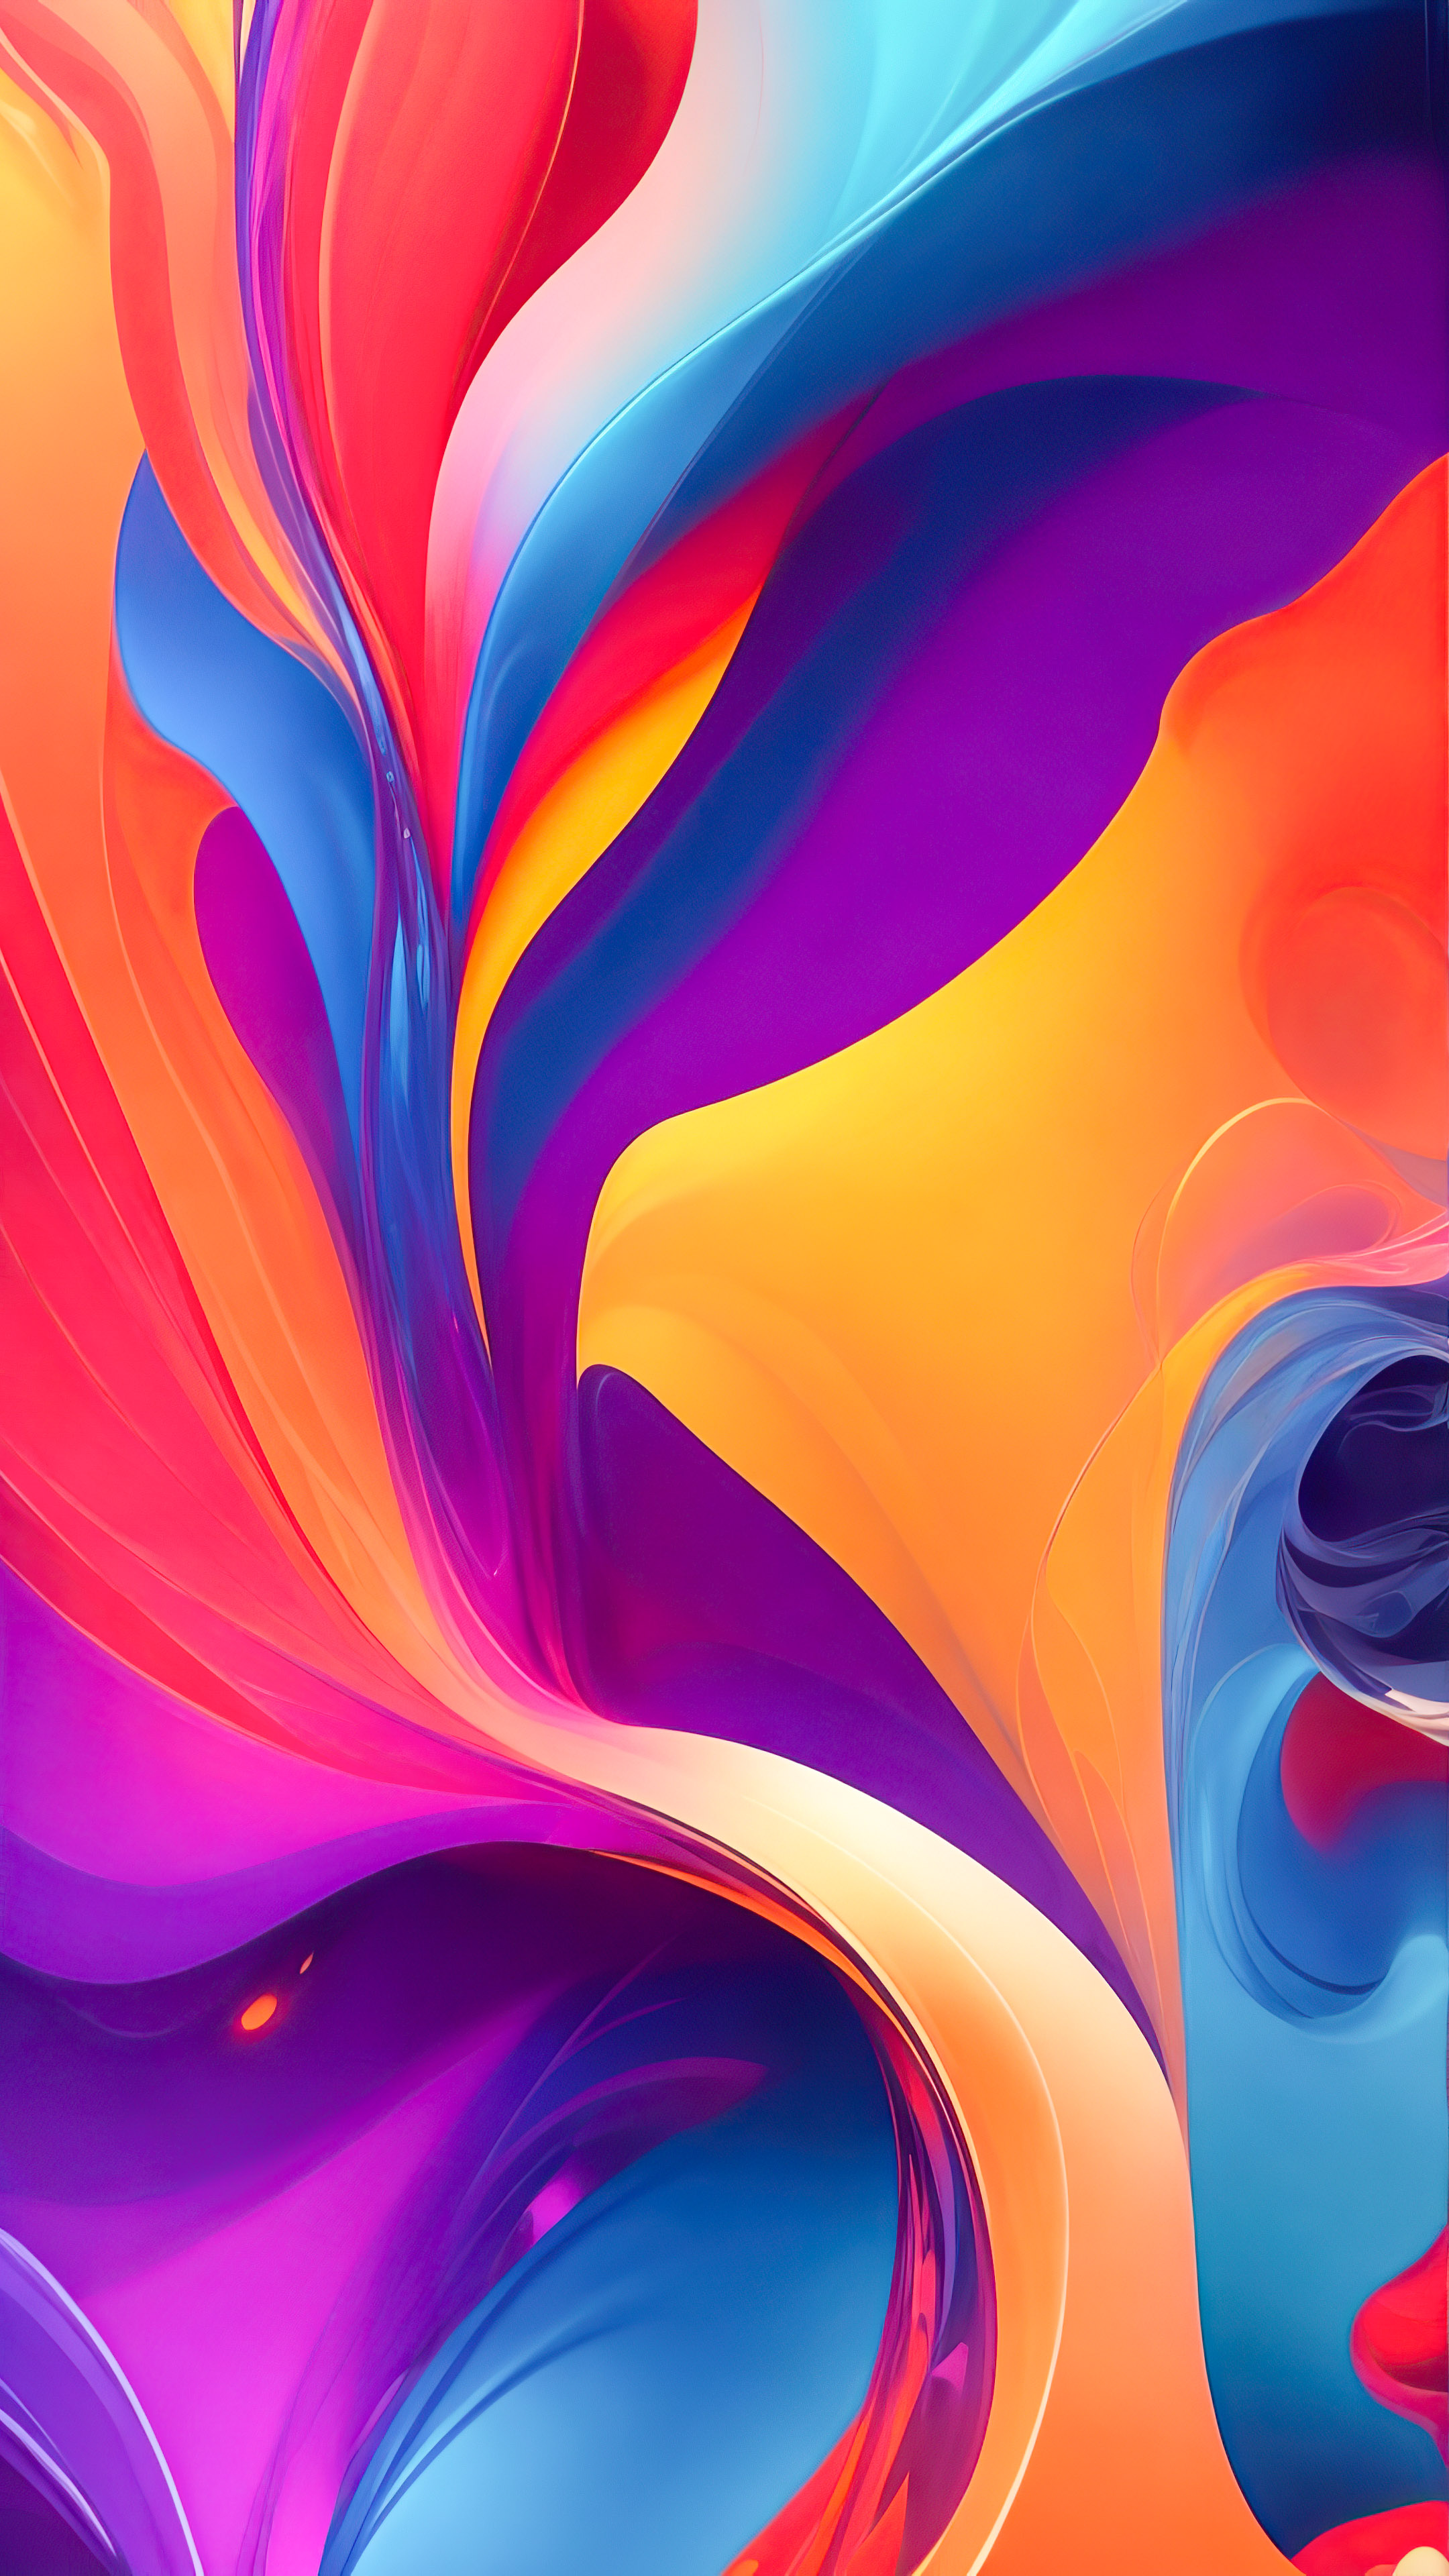 Immerse yourself in the intricate world of iPhone ultra HD abstract wallpaper, showcasing complex and colorful work inspired by chaos and spiritualism.